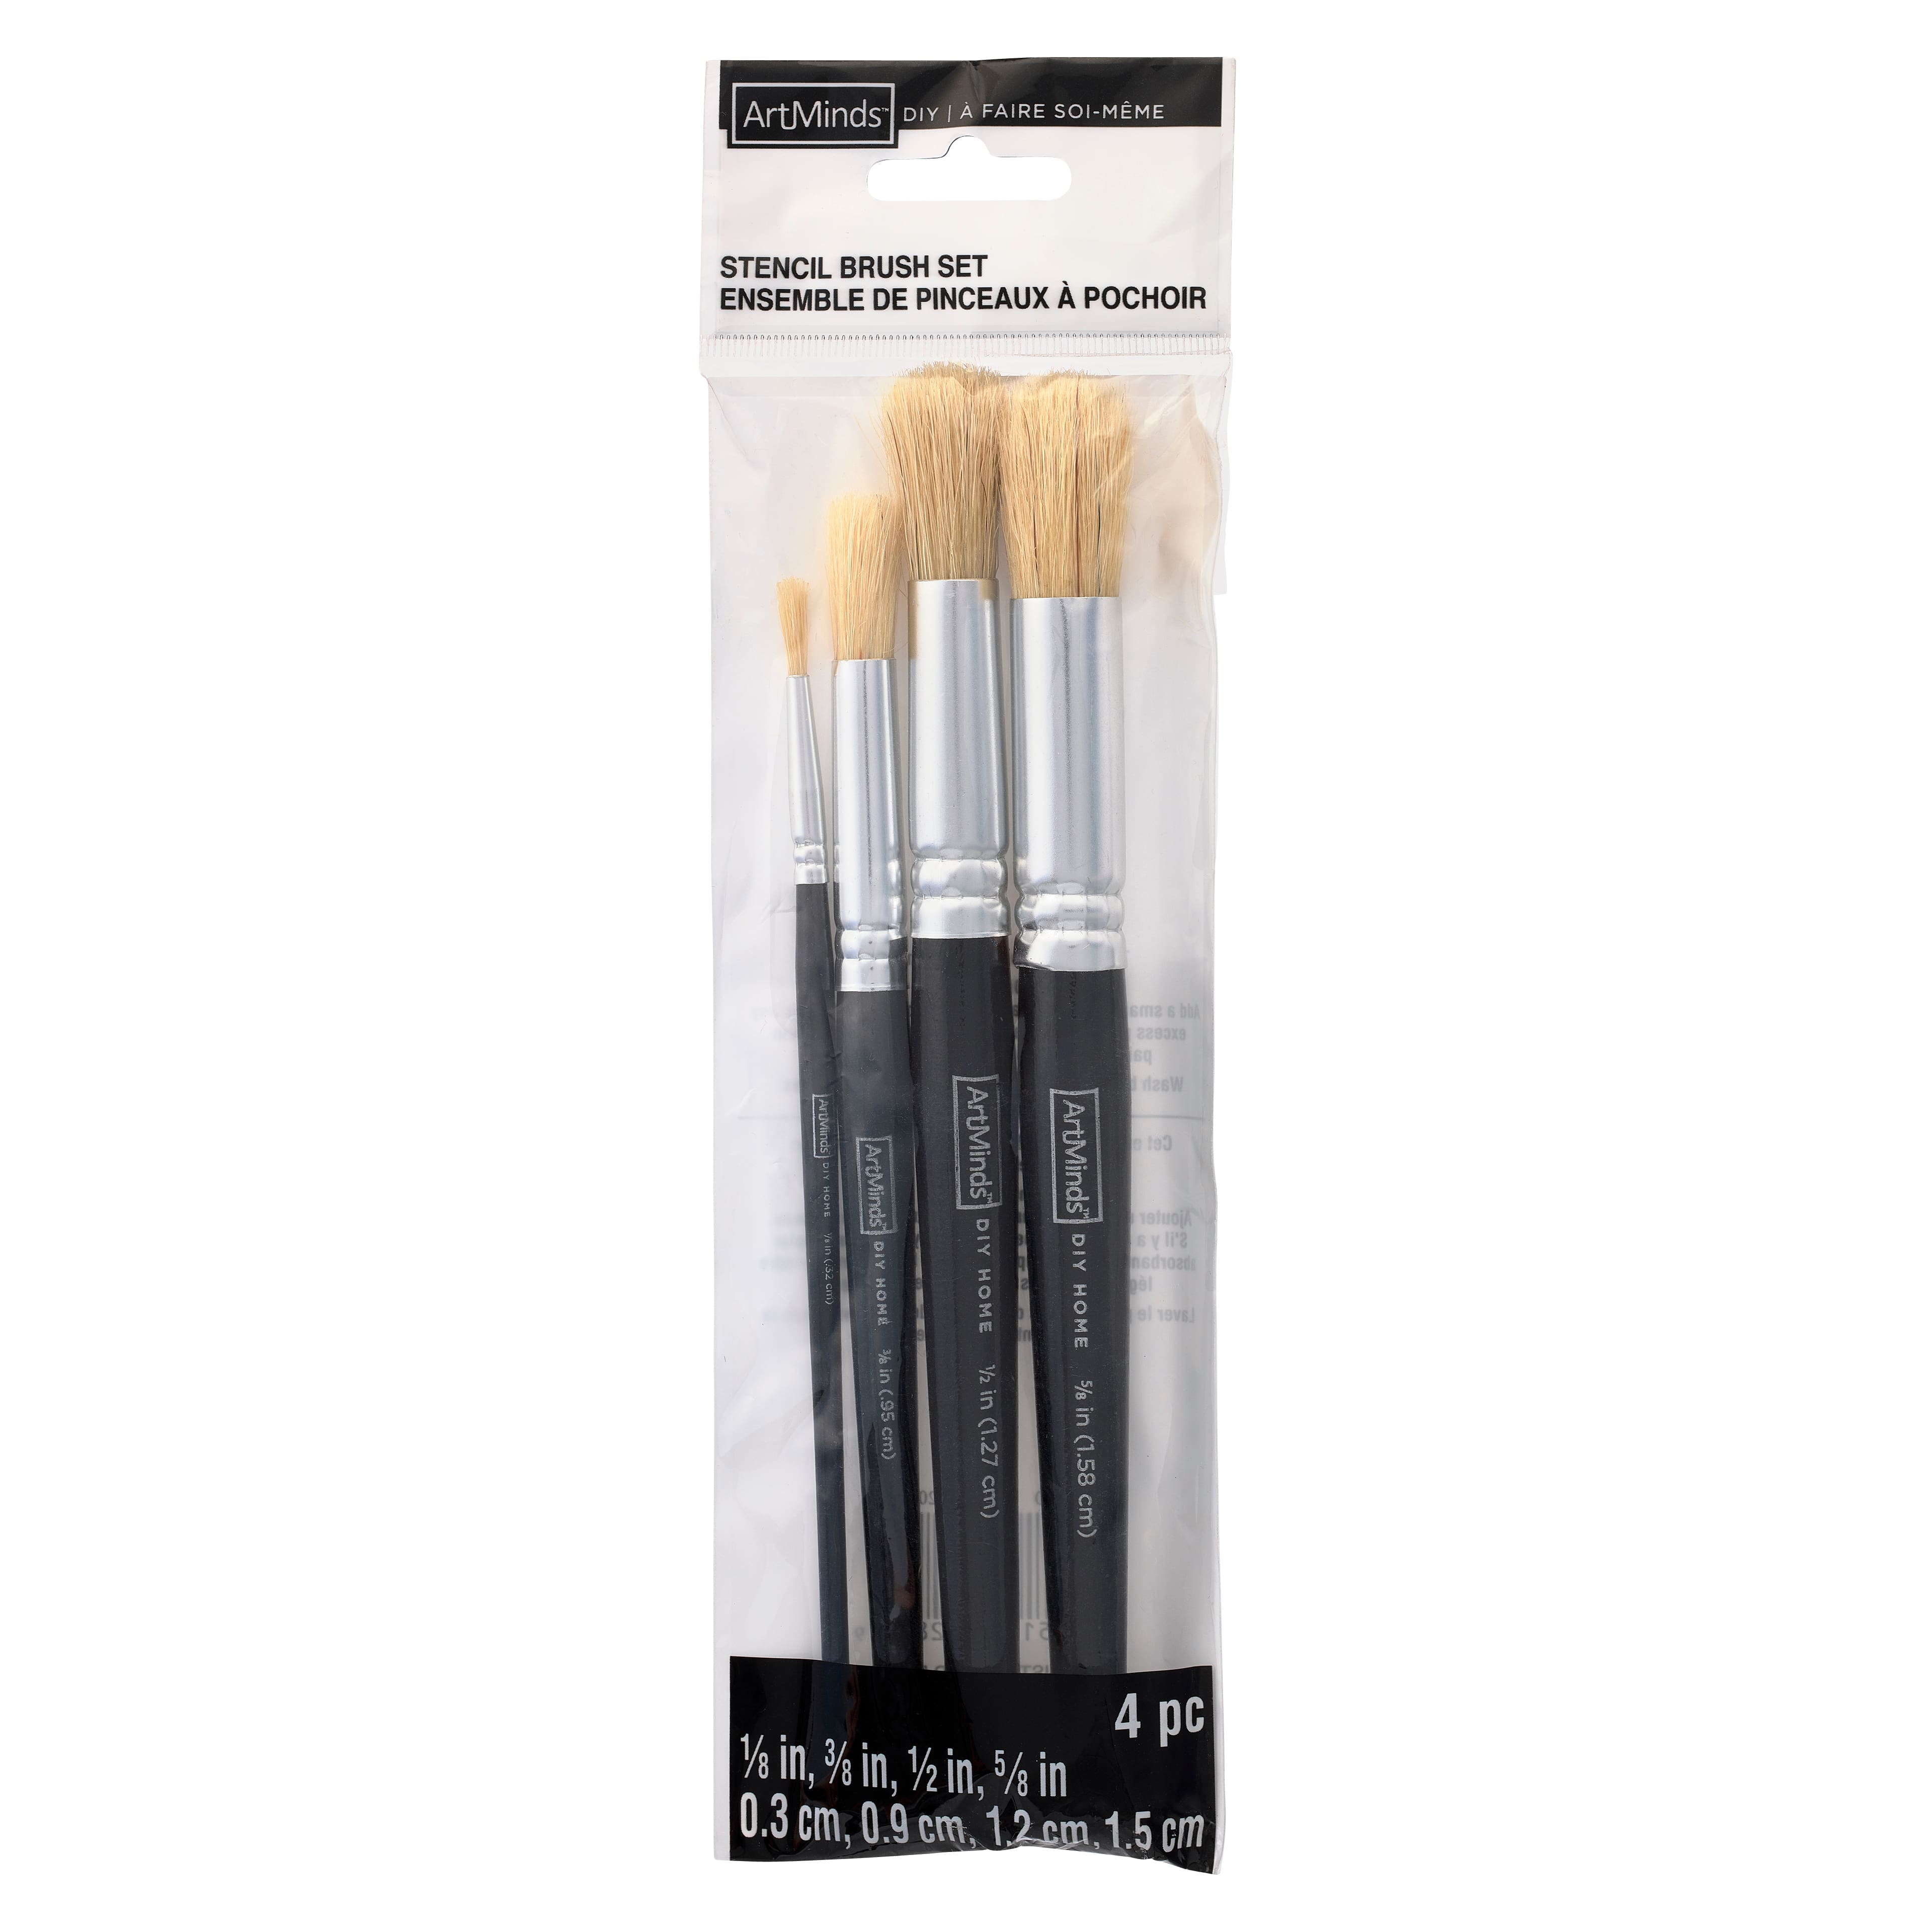 12 Packs: 4 ct. (48 total) Stencil Brush Set by ArtMinds™ DIY Home